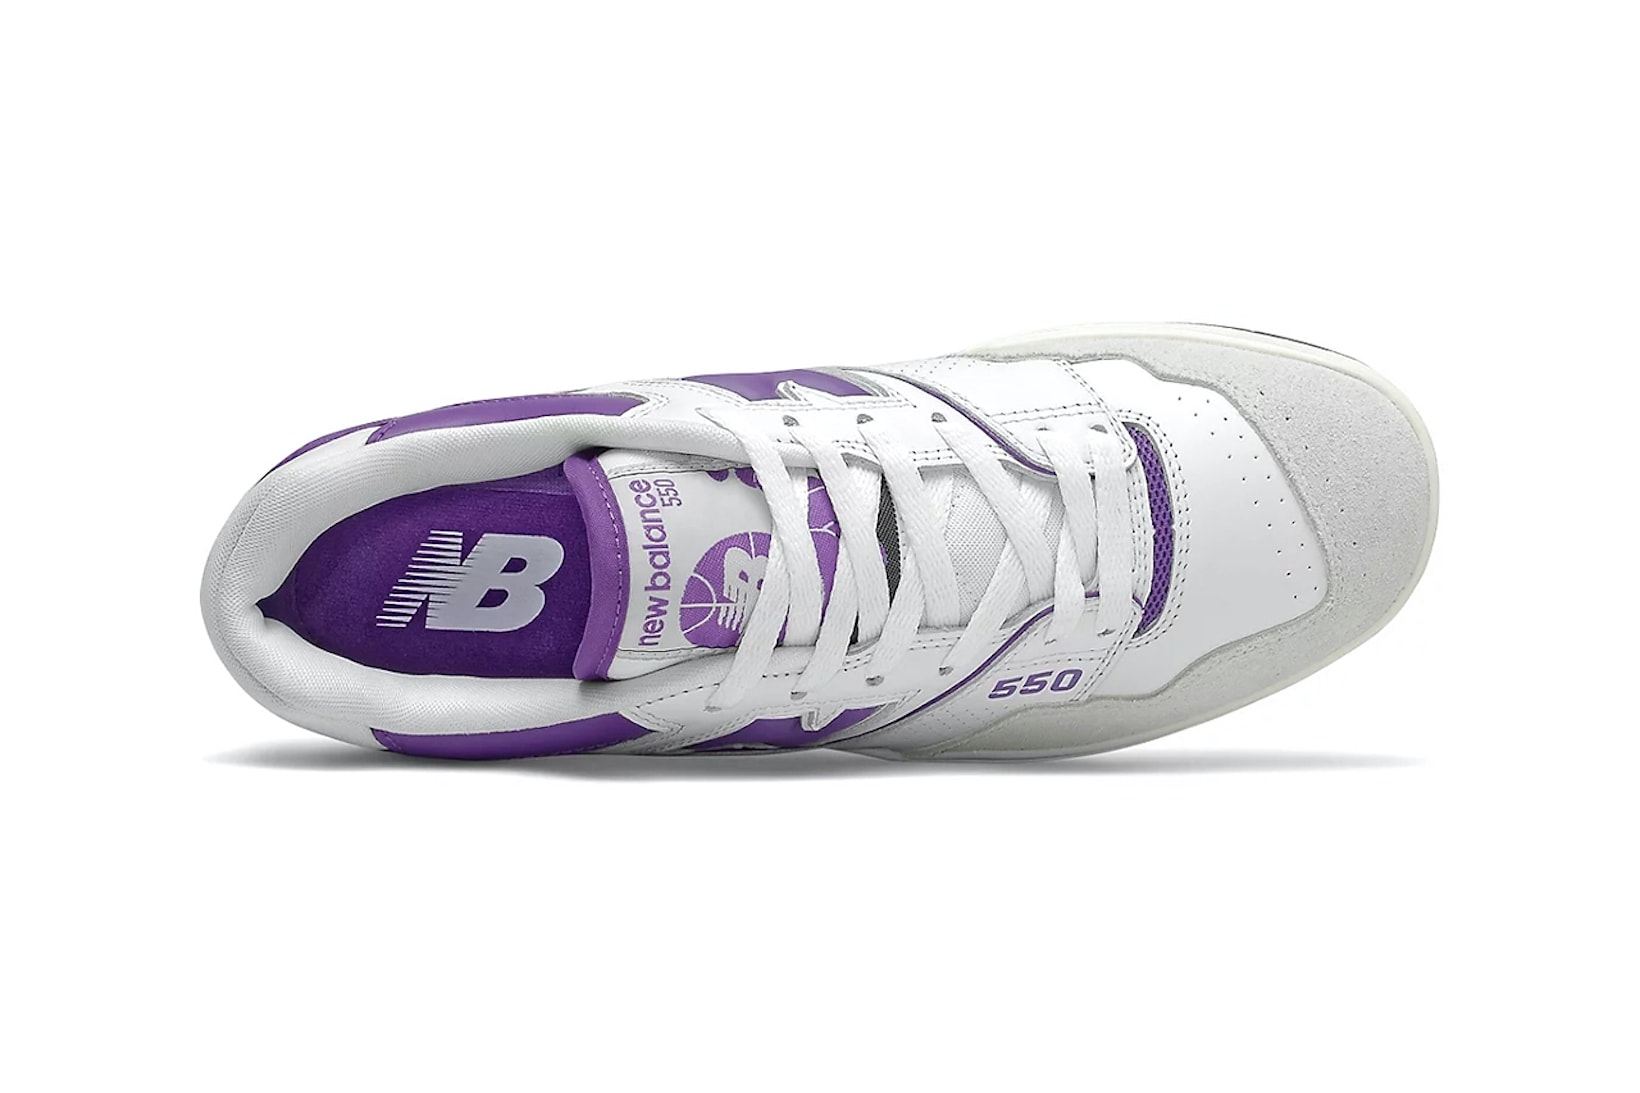 new balance nb 550 purple white colorway sneakers footwear kicks shoes top insole